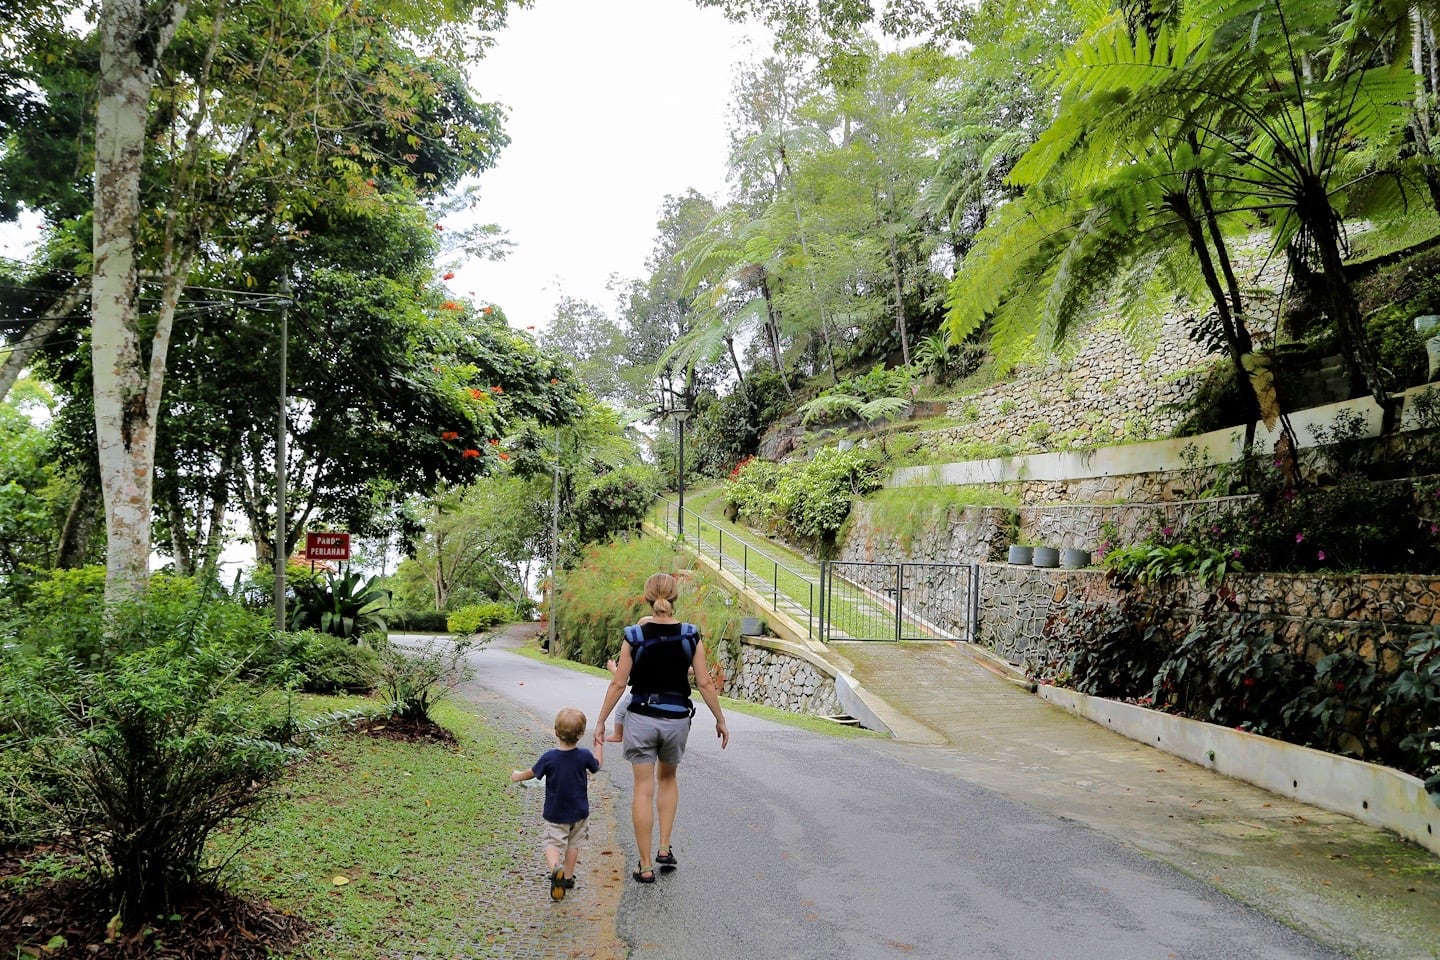 mother and child walking on a road near a hill